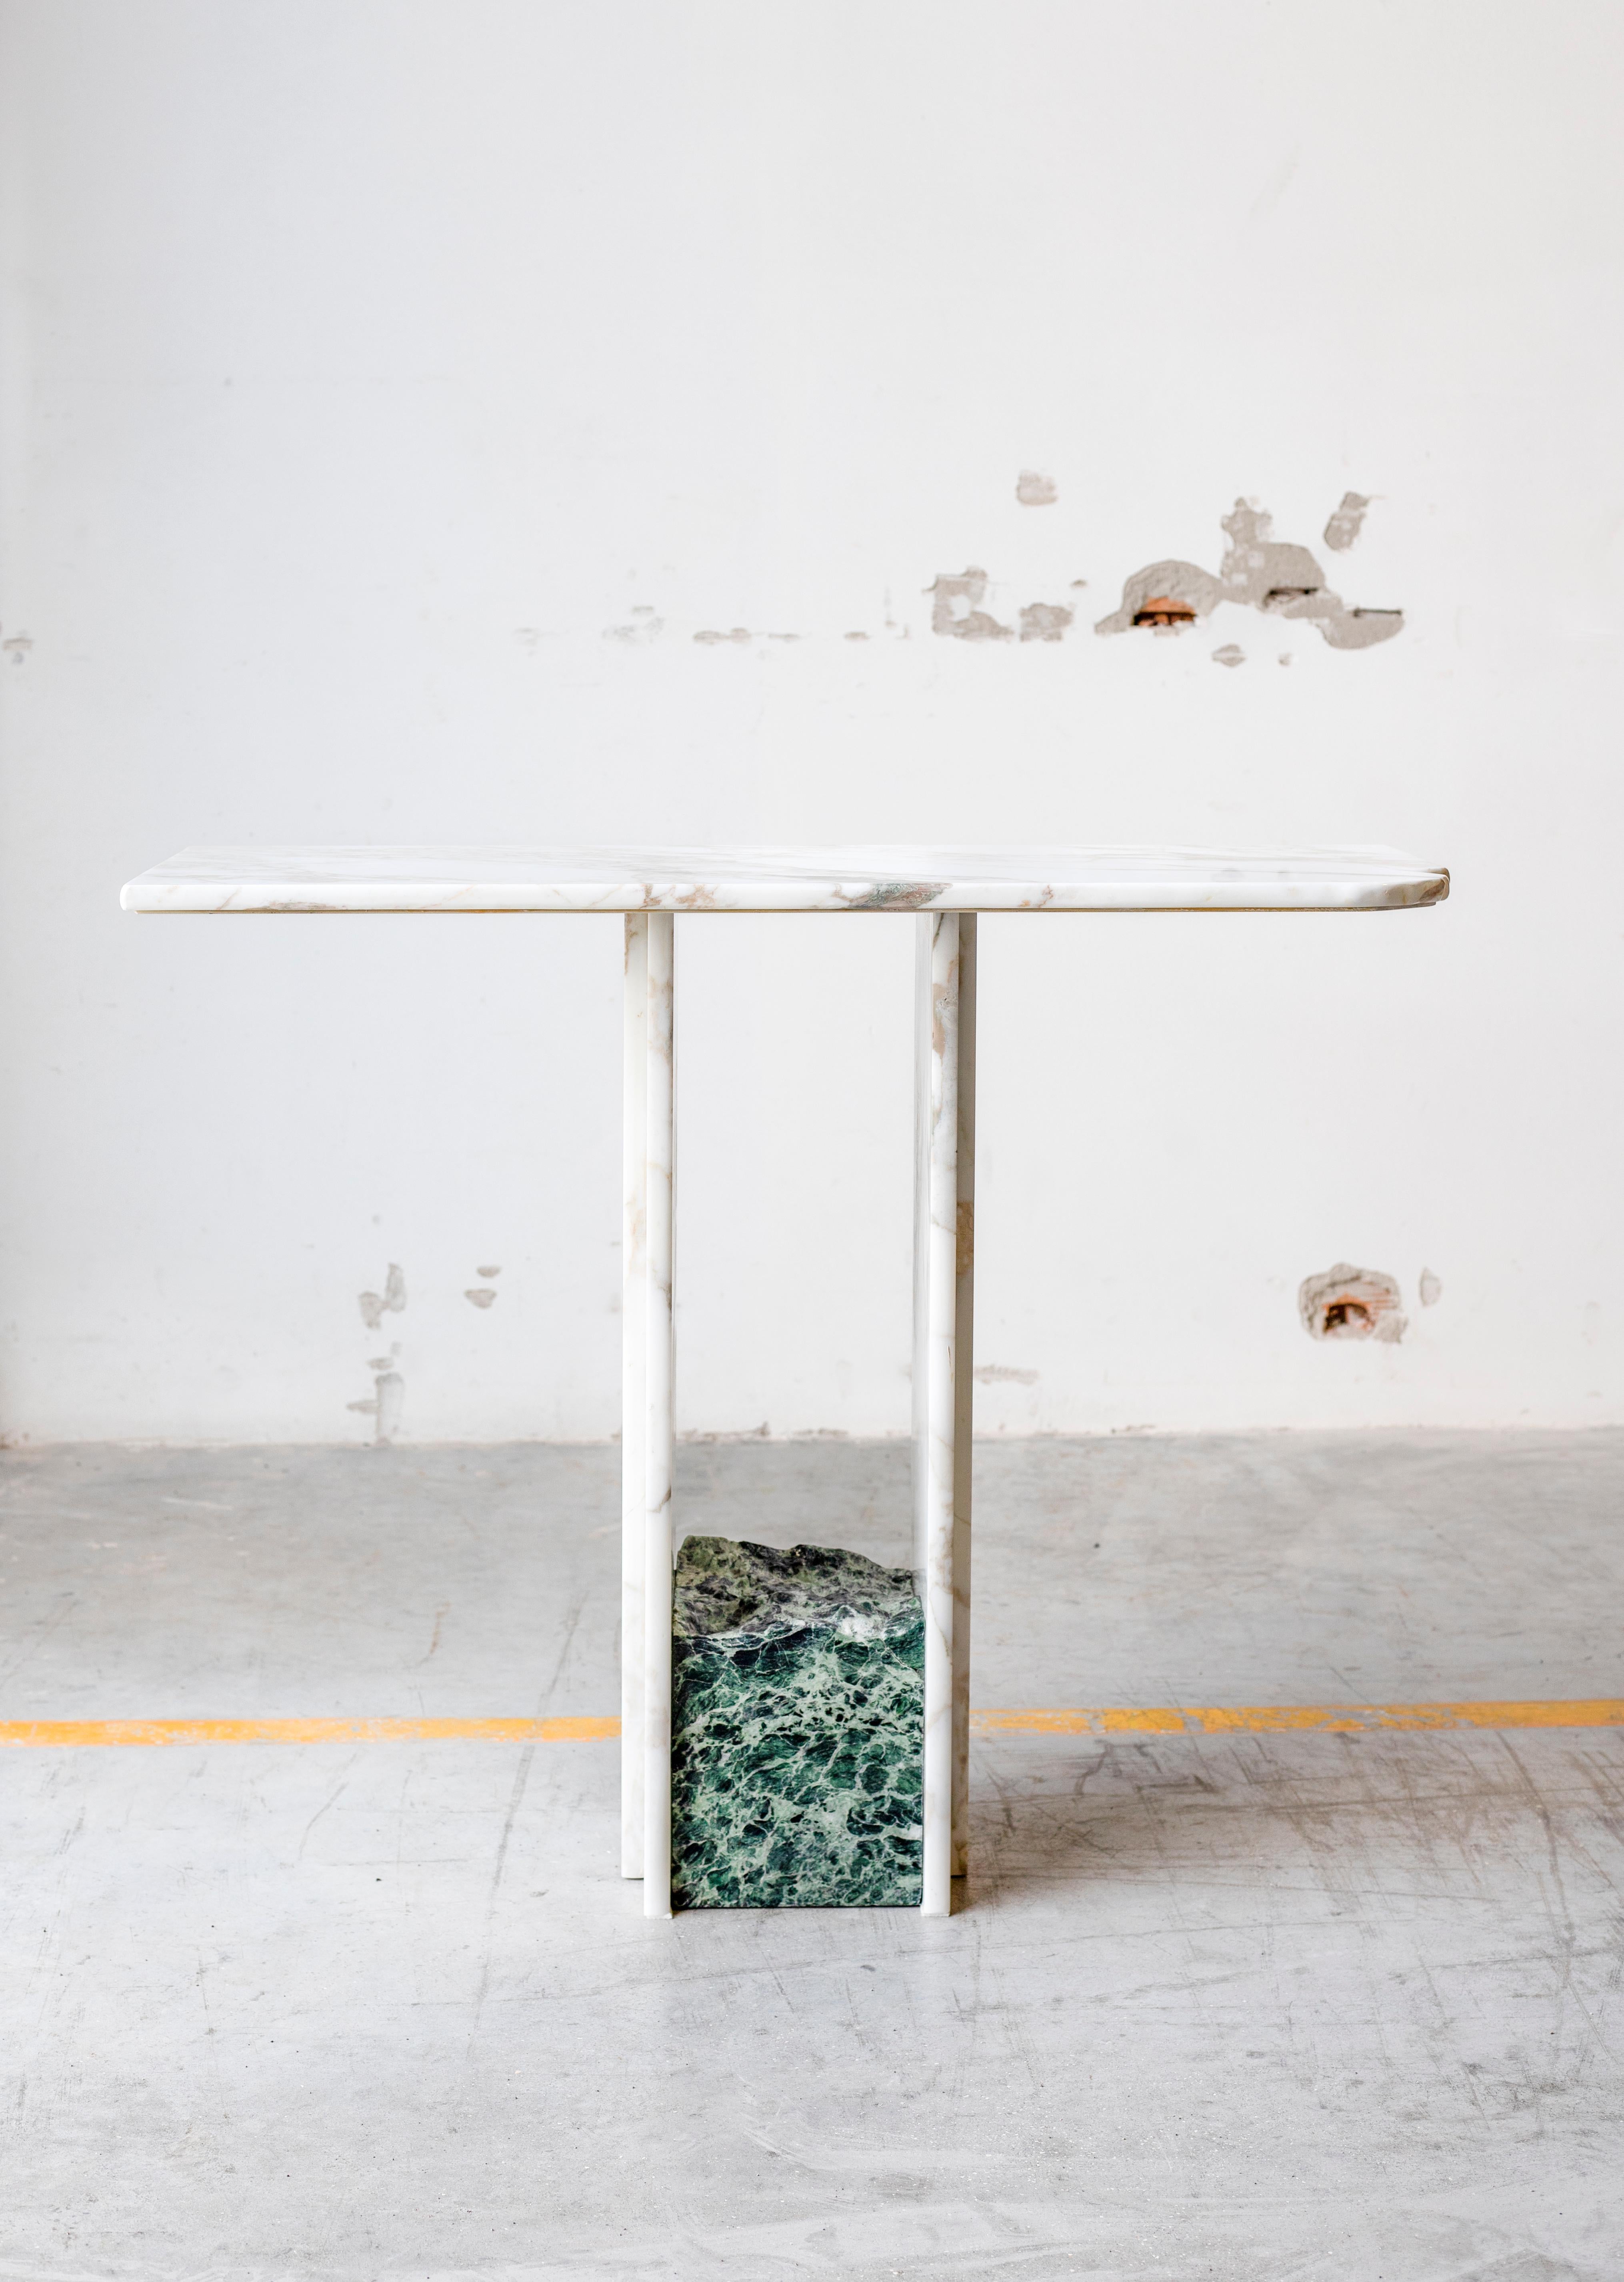 SSC103 console table by Stone Stackers
Dimensions: W 101.5 x D 40.5 x H 81 cm.
Materials: Calacatta Oro marble, Verde Alpi marble.
Marble Structure: Calacatta Oro
Marble Base: Verde Alpi
Weight: 72 kg

Original console with an elegant &